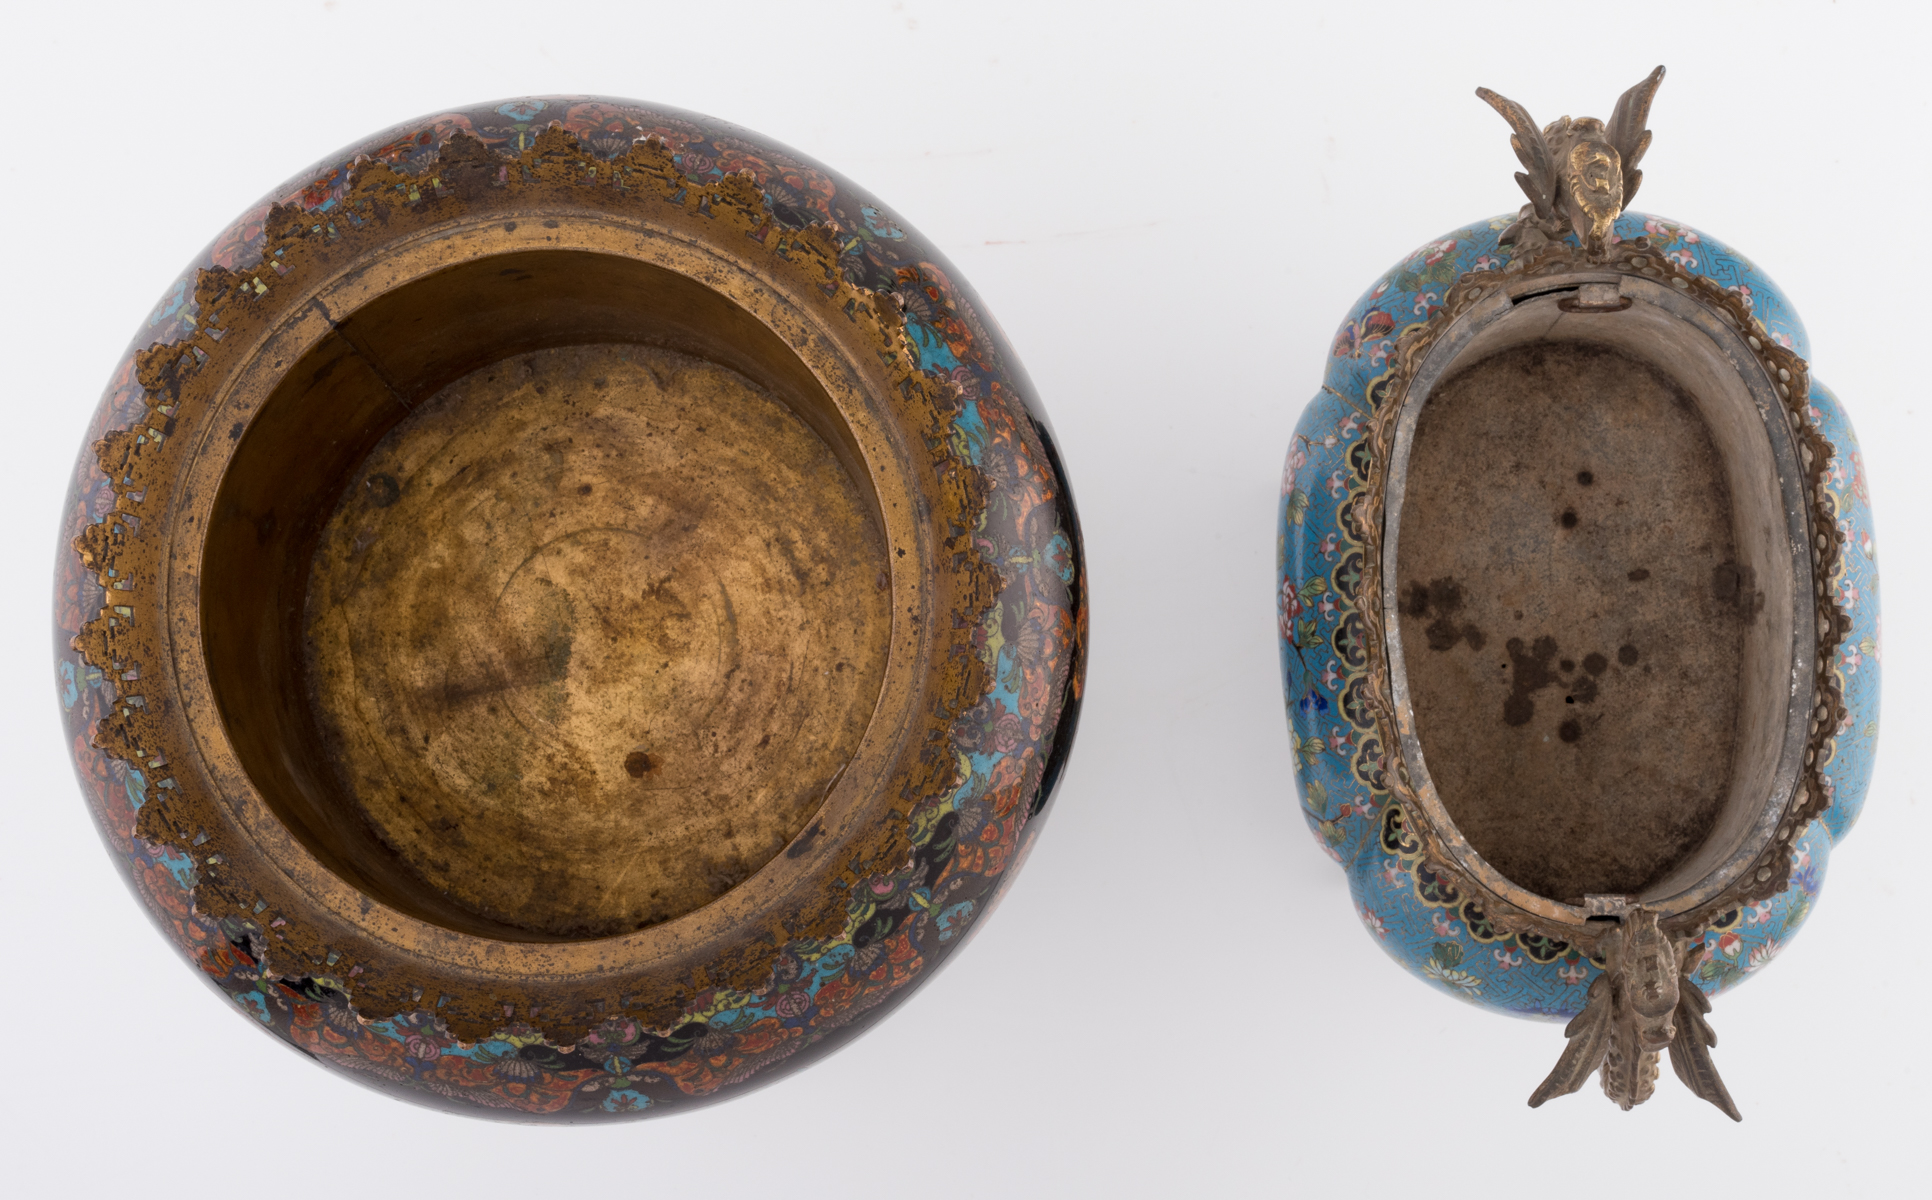 Two Chinese cloisonné enamel jardinieres with bronze mounts, 19th / 20thC, H 27 - 38 - W 31 - ø 29 c - Image 5 of 7